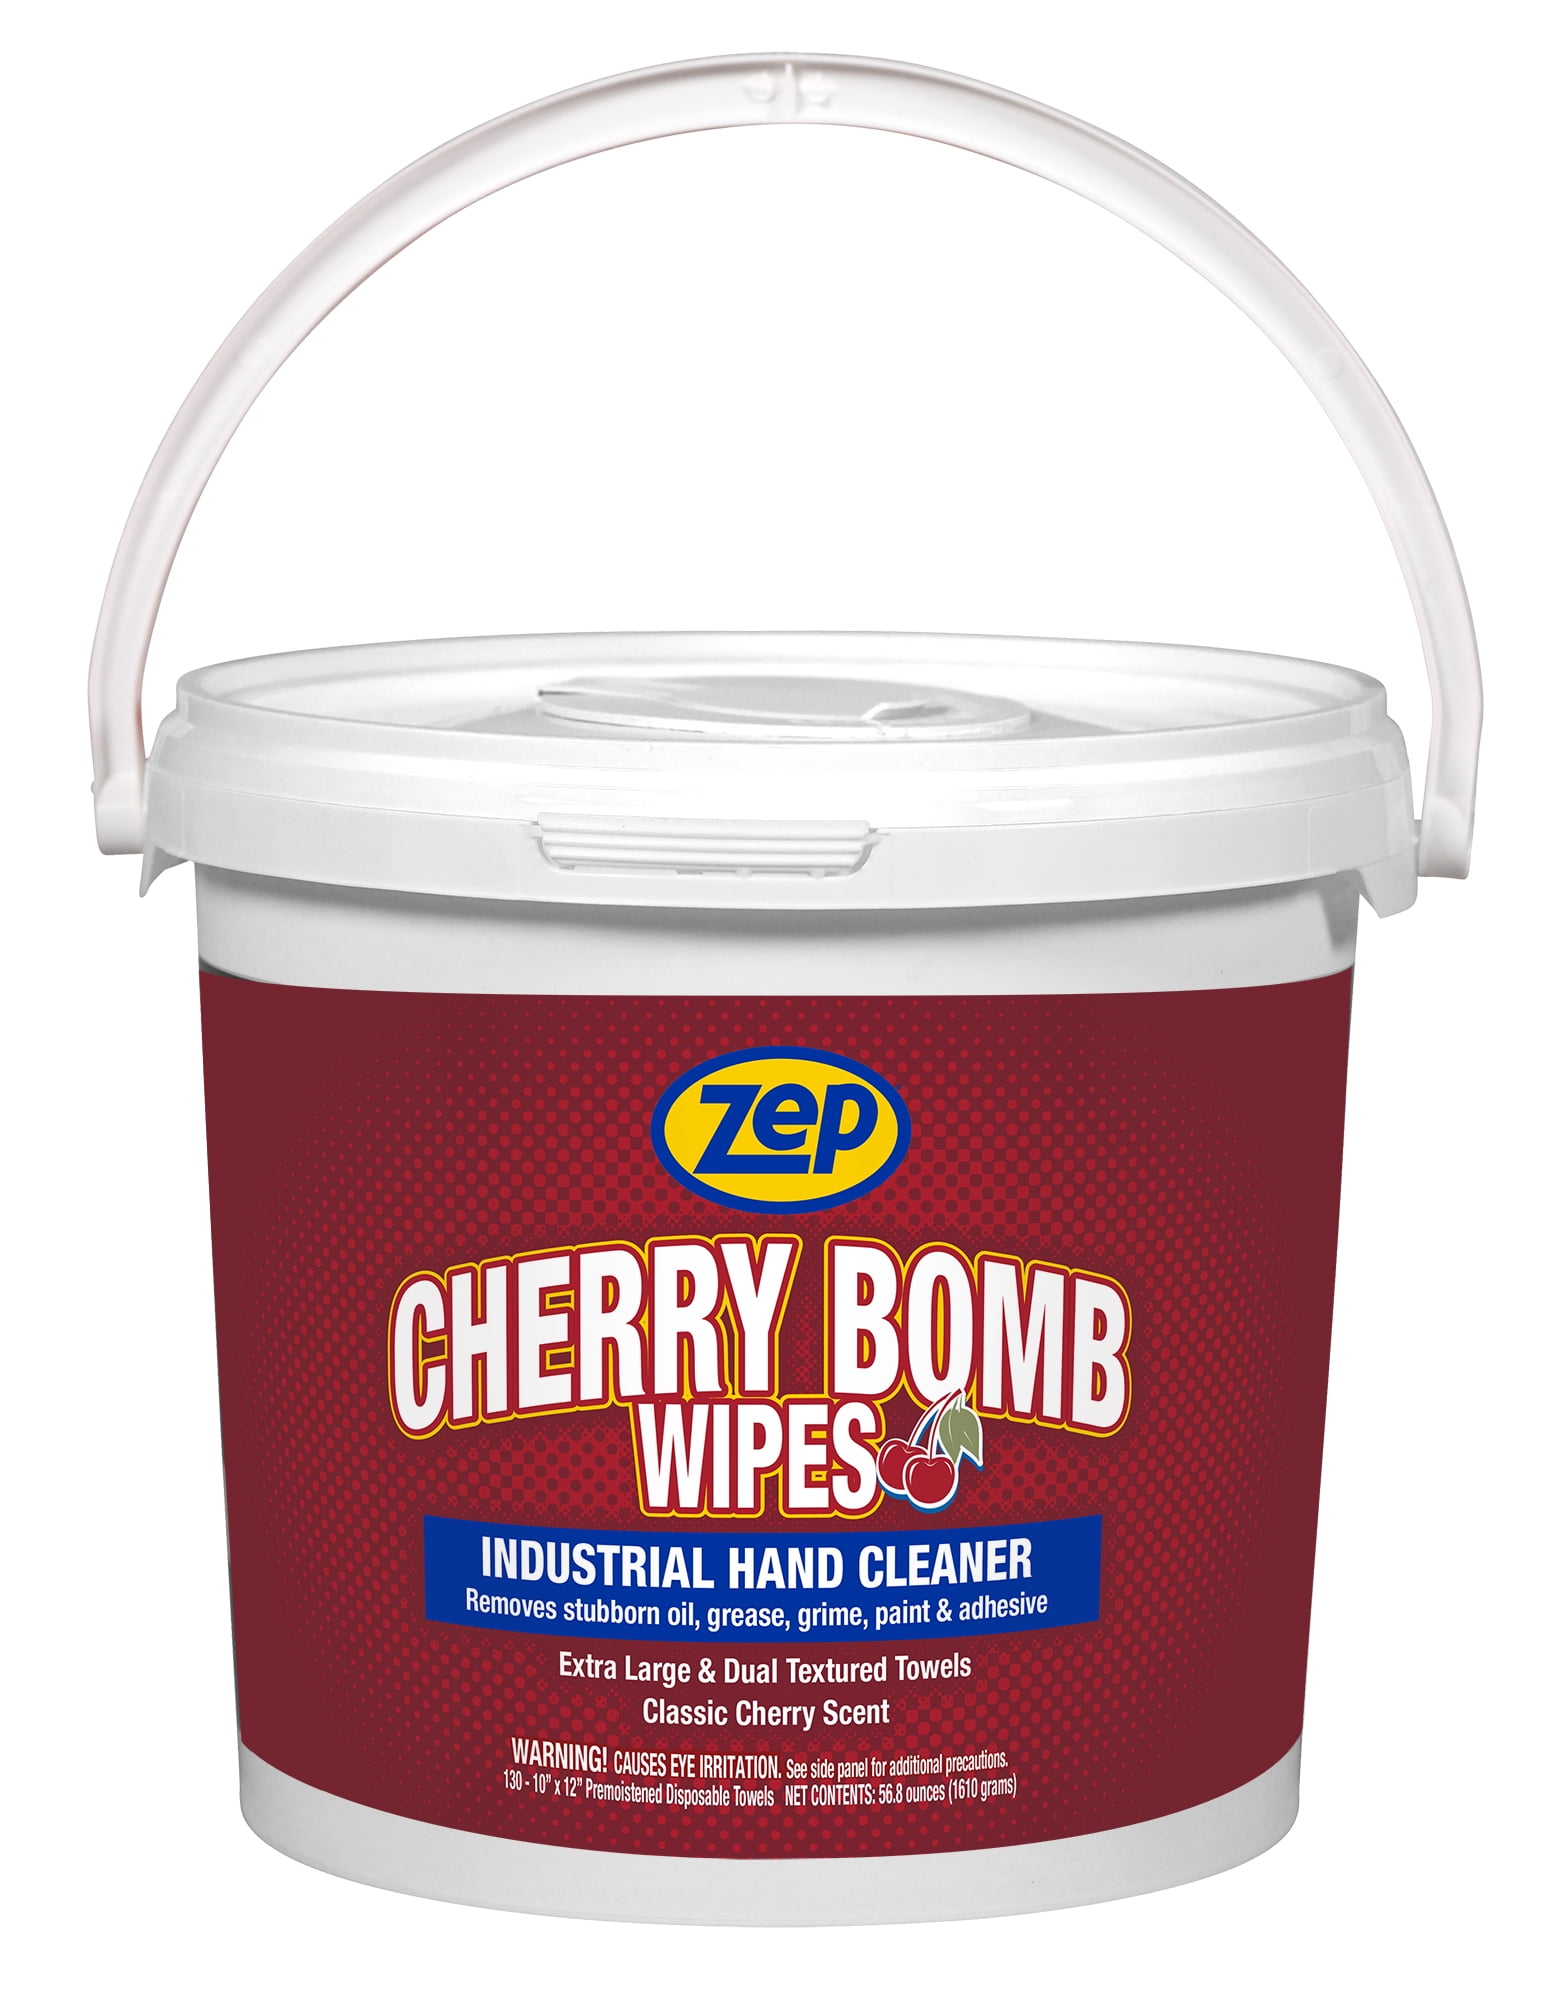 Zep Cherry Bomb Industrial Hand Cleaning and Degreasing Wipes, Size: 10 inch x 12 inch